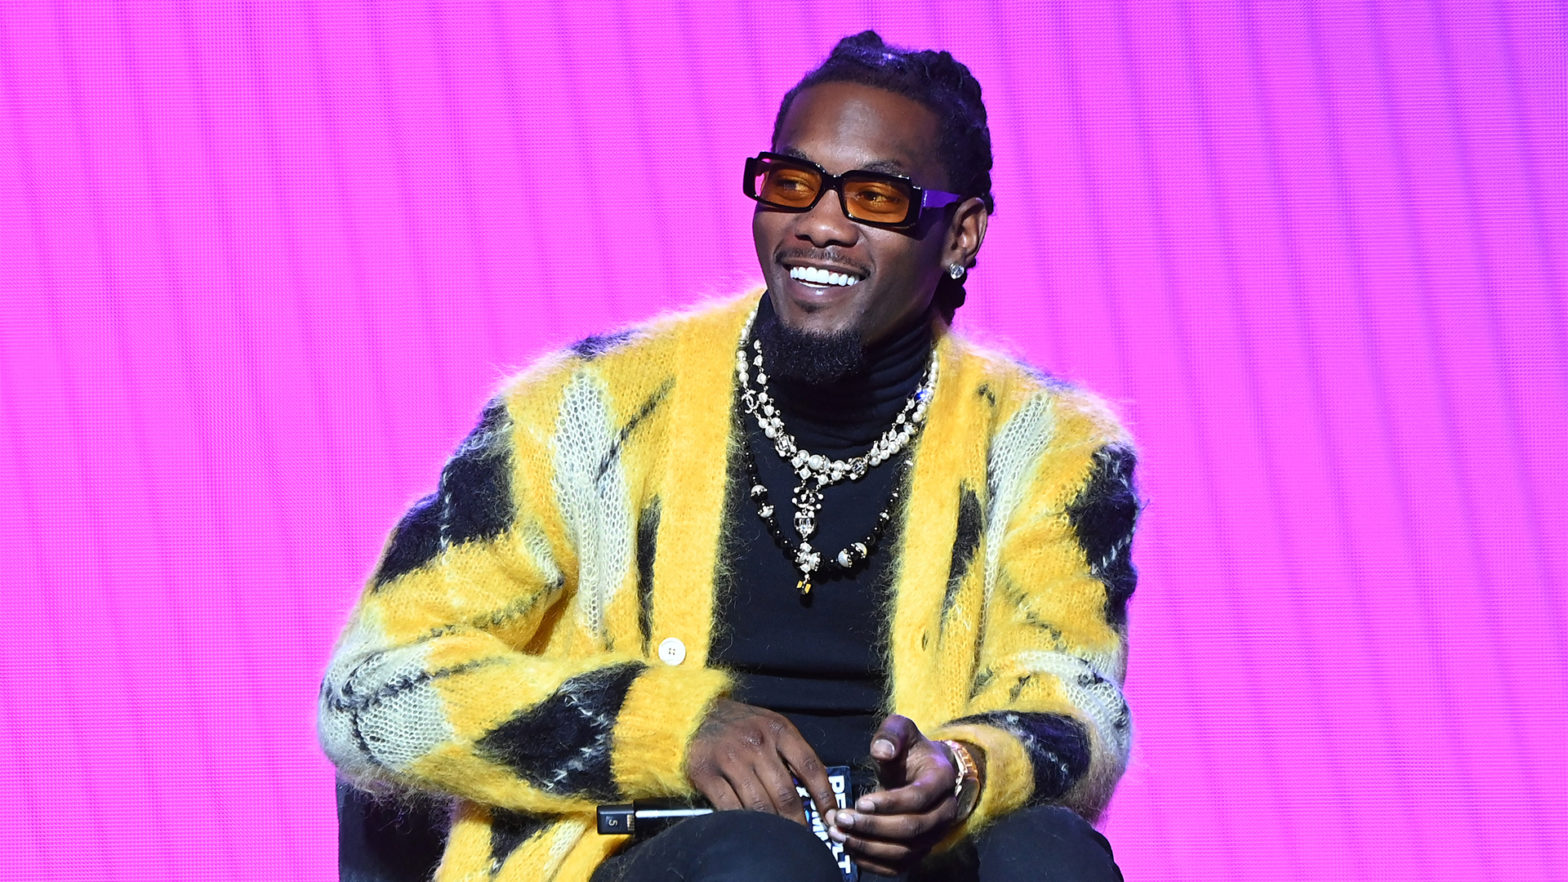 Offset Files Lawsuit Against Quality Control, Claiming The Label Refuses To Honor His Deal As A Solo Act